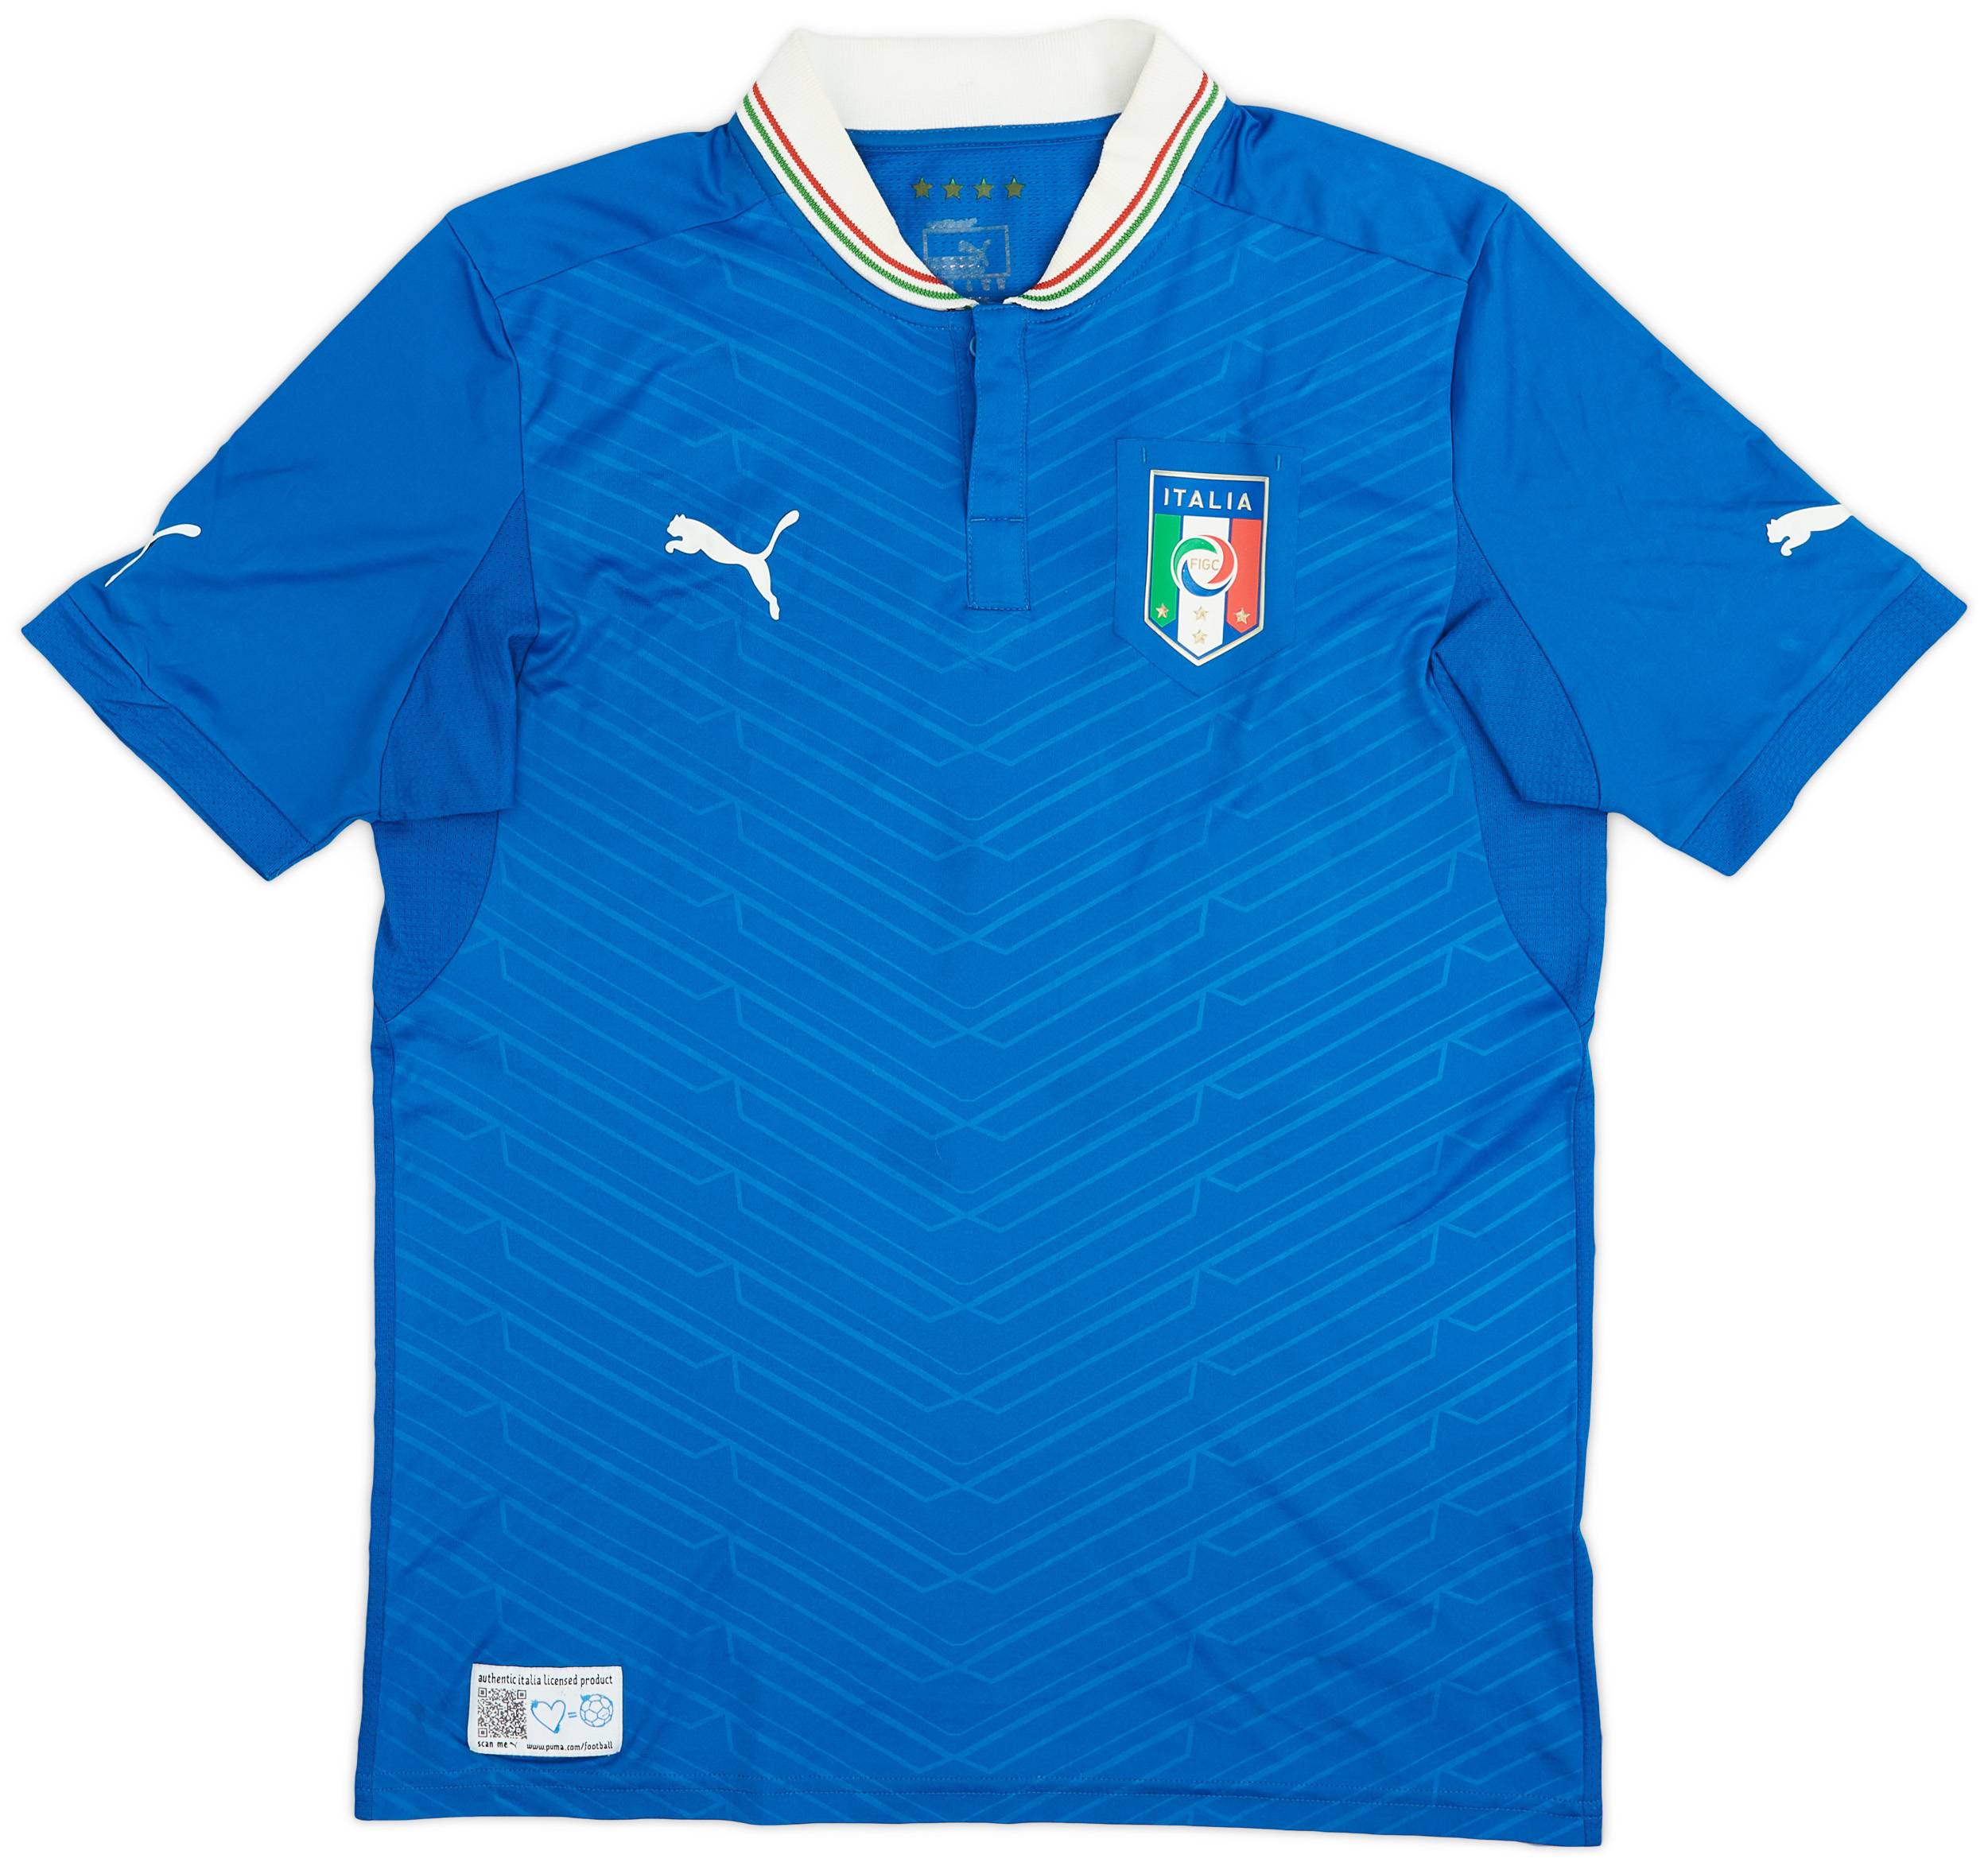 2012-13 Italy Home Shirt - 5/10 - (M)